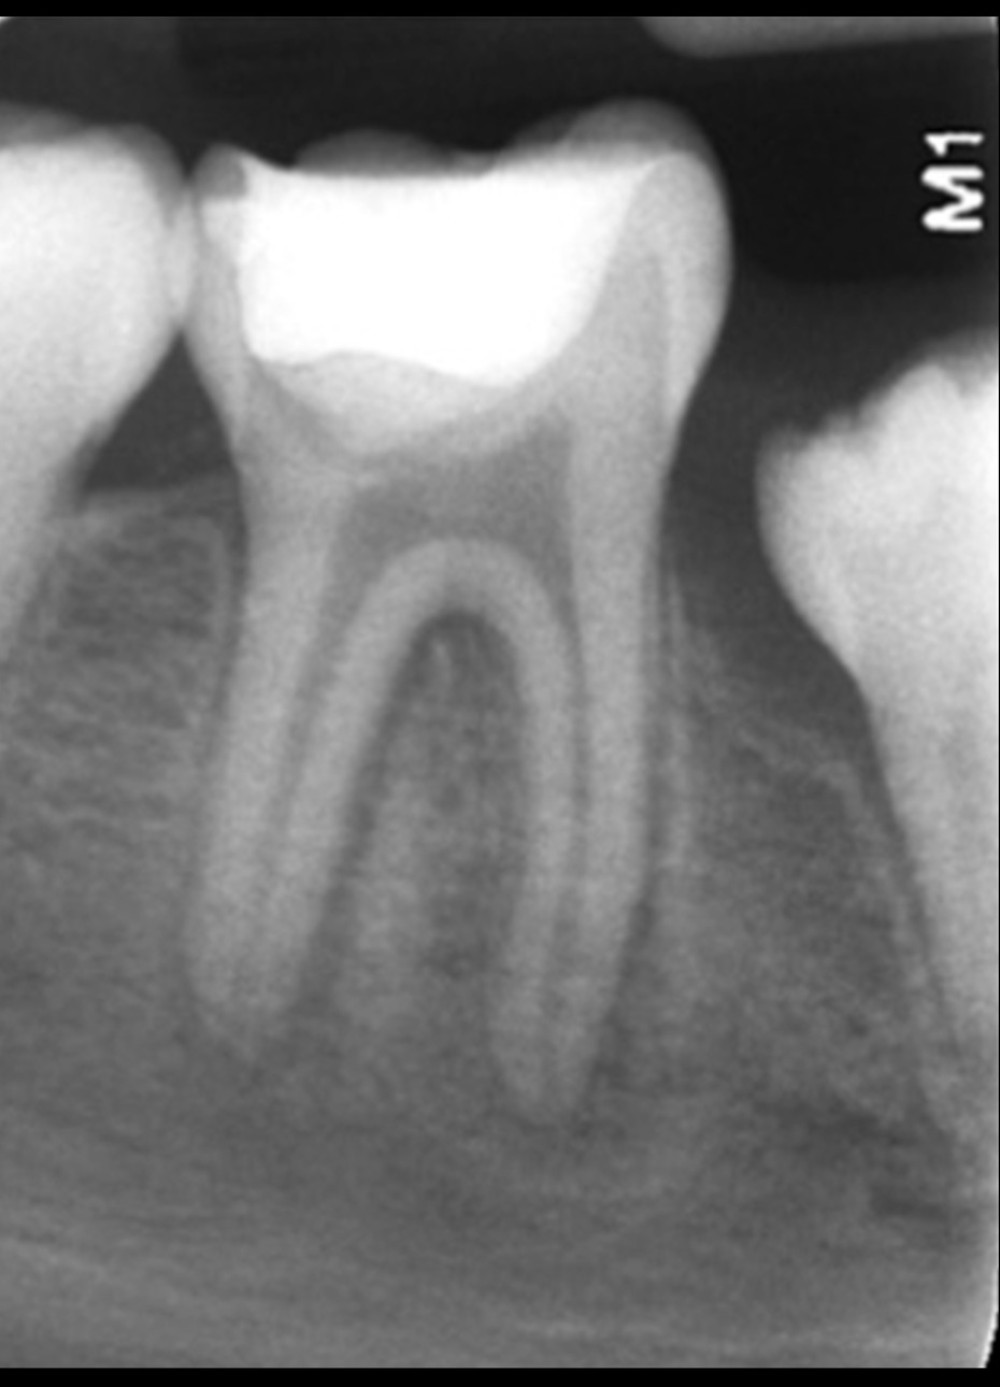 Immediate postoperative intraoral periapical radiograph showing permanent composite restoration over the Biodentine, which was used as a capping material covering the dental pulp tissue.